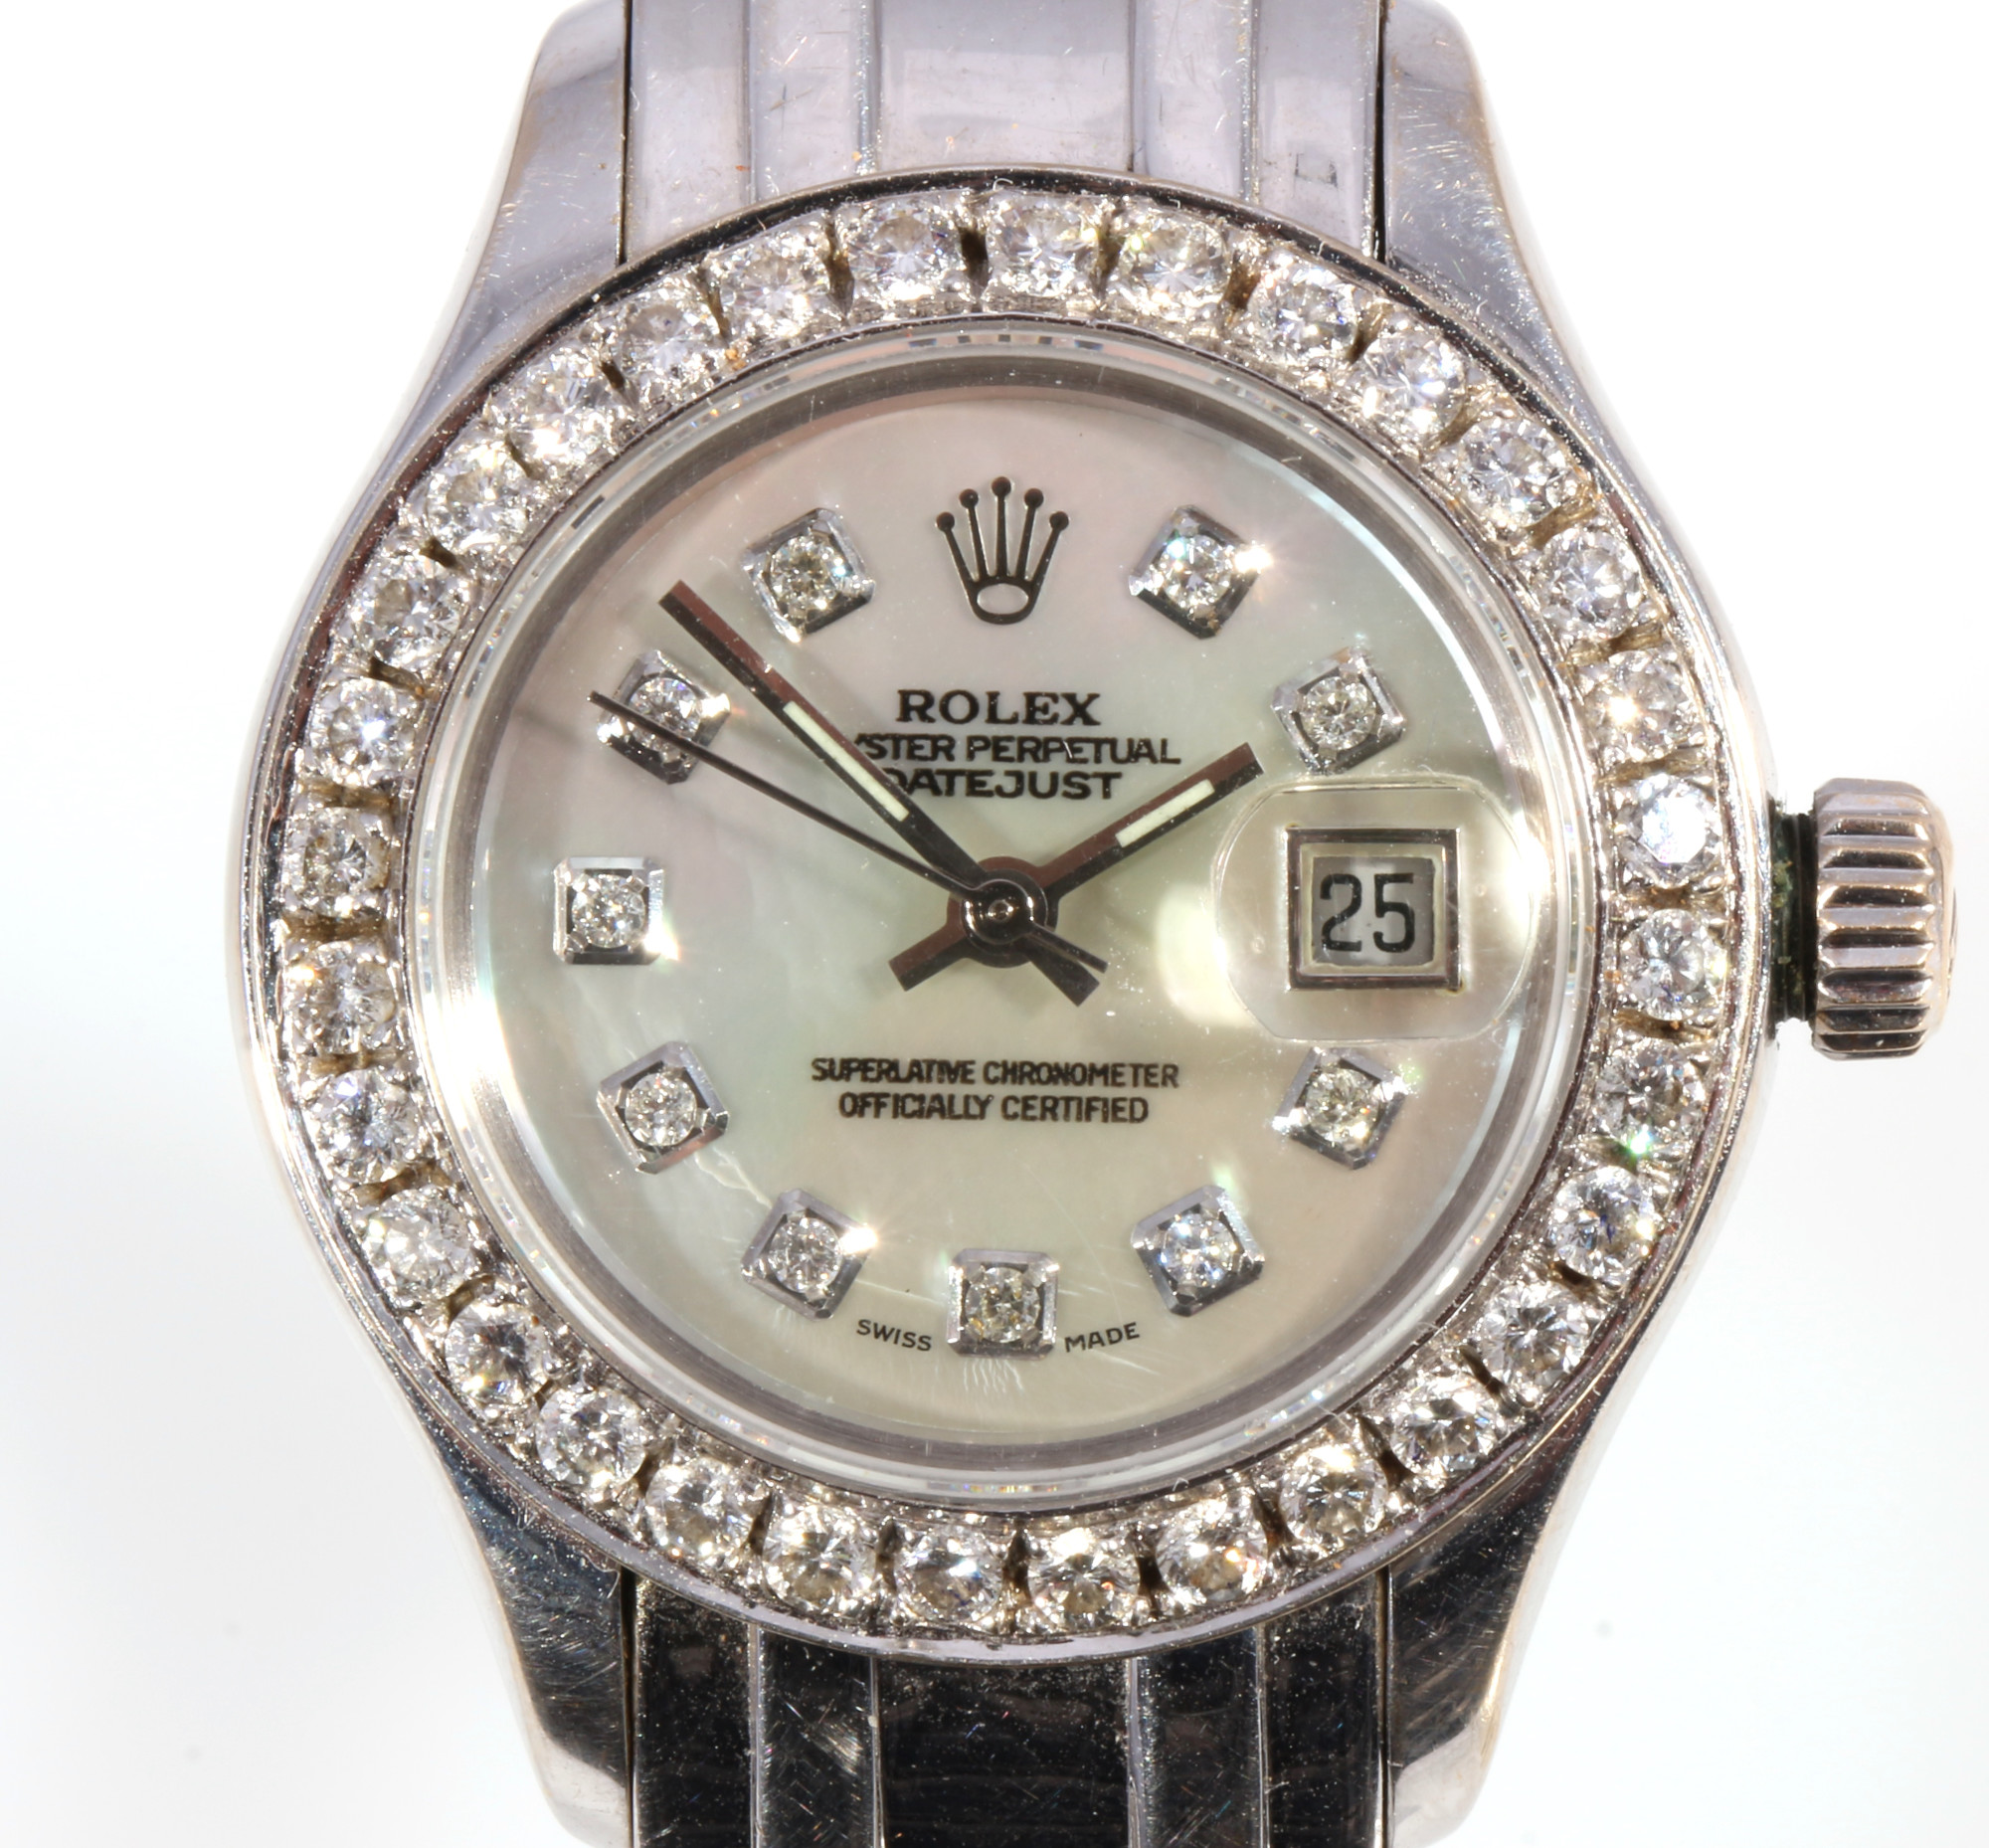 Rolex Oyster Perpetual DateJust 750 gold women's wrist watch with diamonds, 18K Gold Damenuhr mit Di - Image 2 of 6